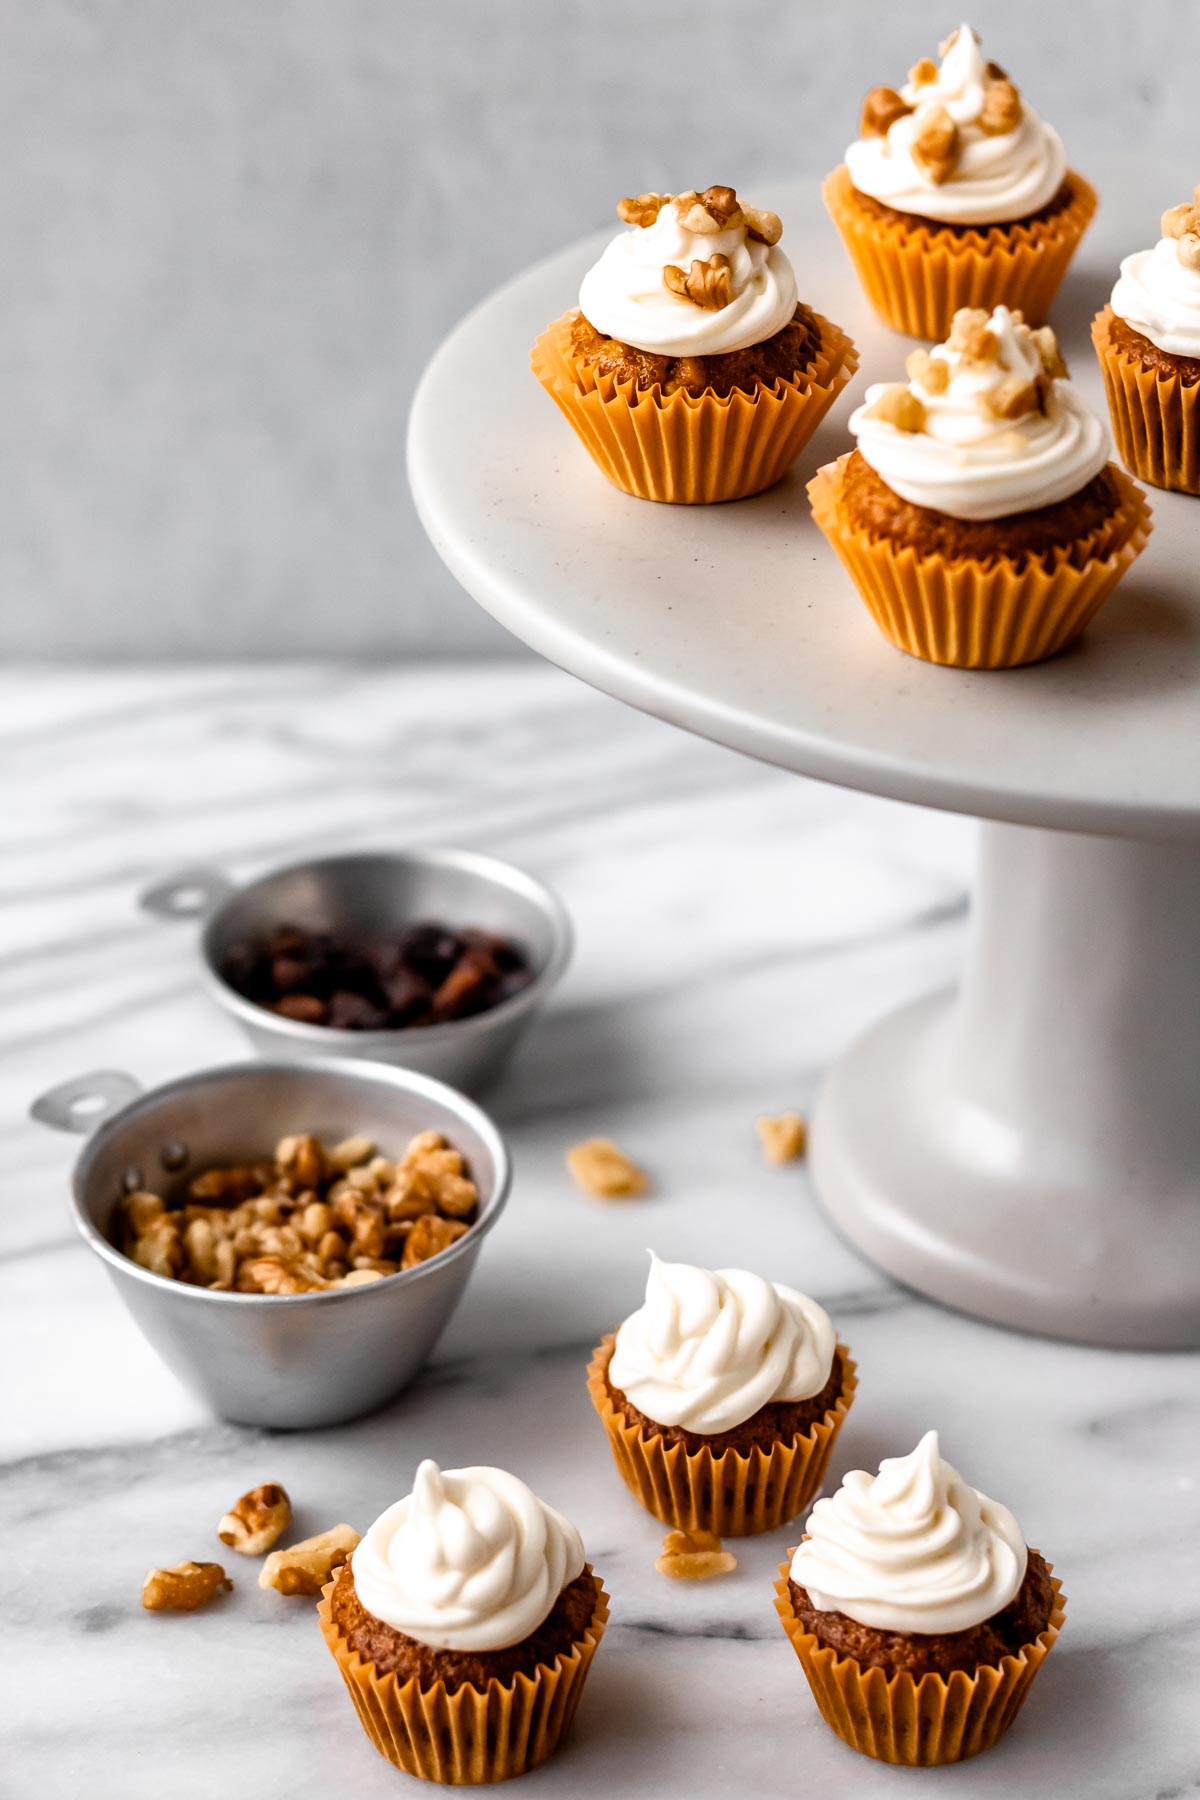 Mini carrot cakes on and around a cake stand with 2 measuring cups filled with raisins and walnuts.